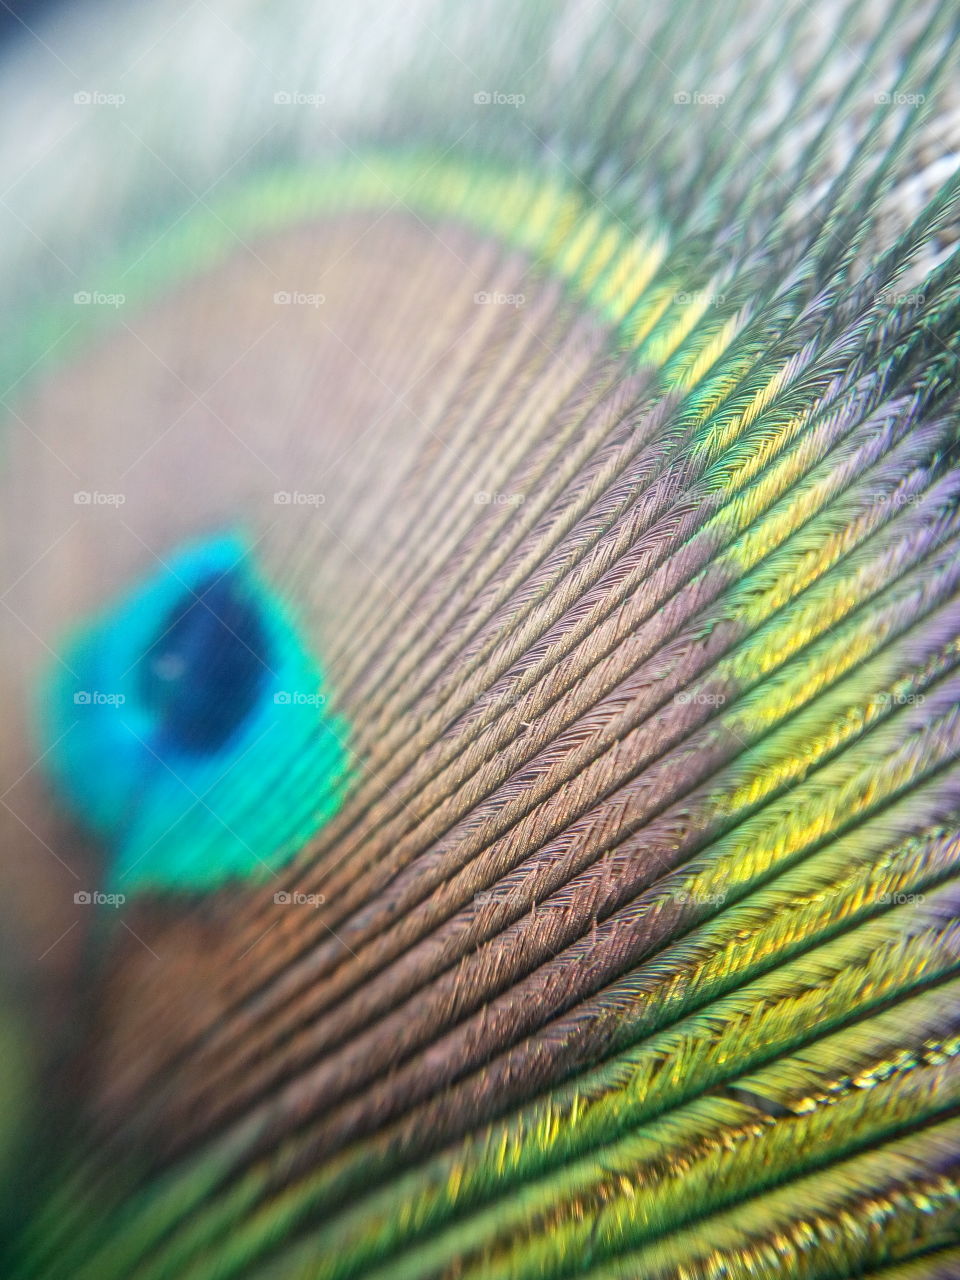 the most beautiful and stunning photo of peacock feather